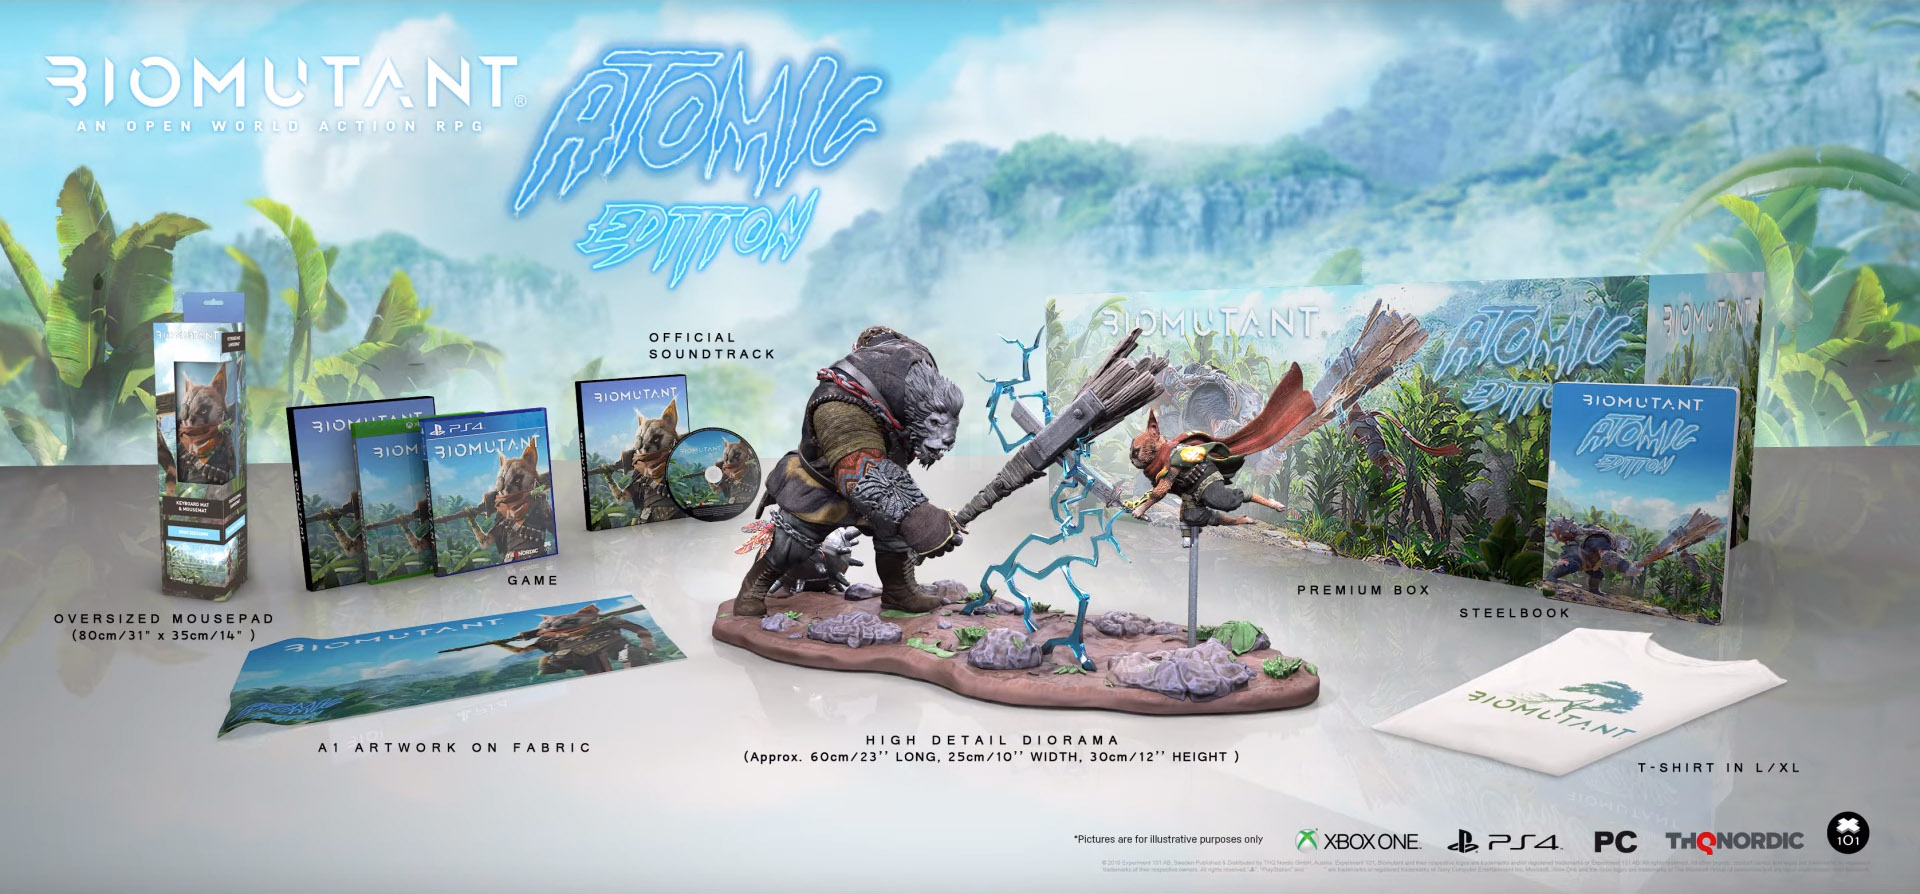 Biomutant Special Editions revealed and detailed